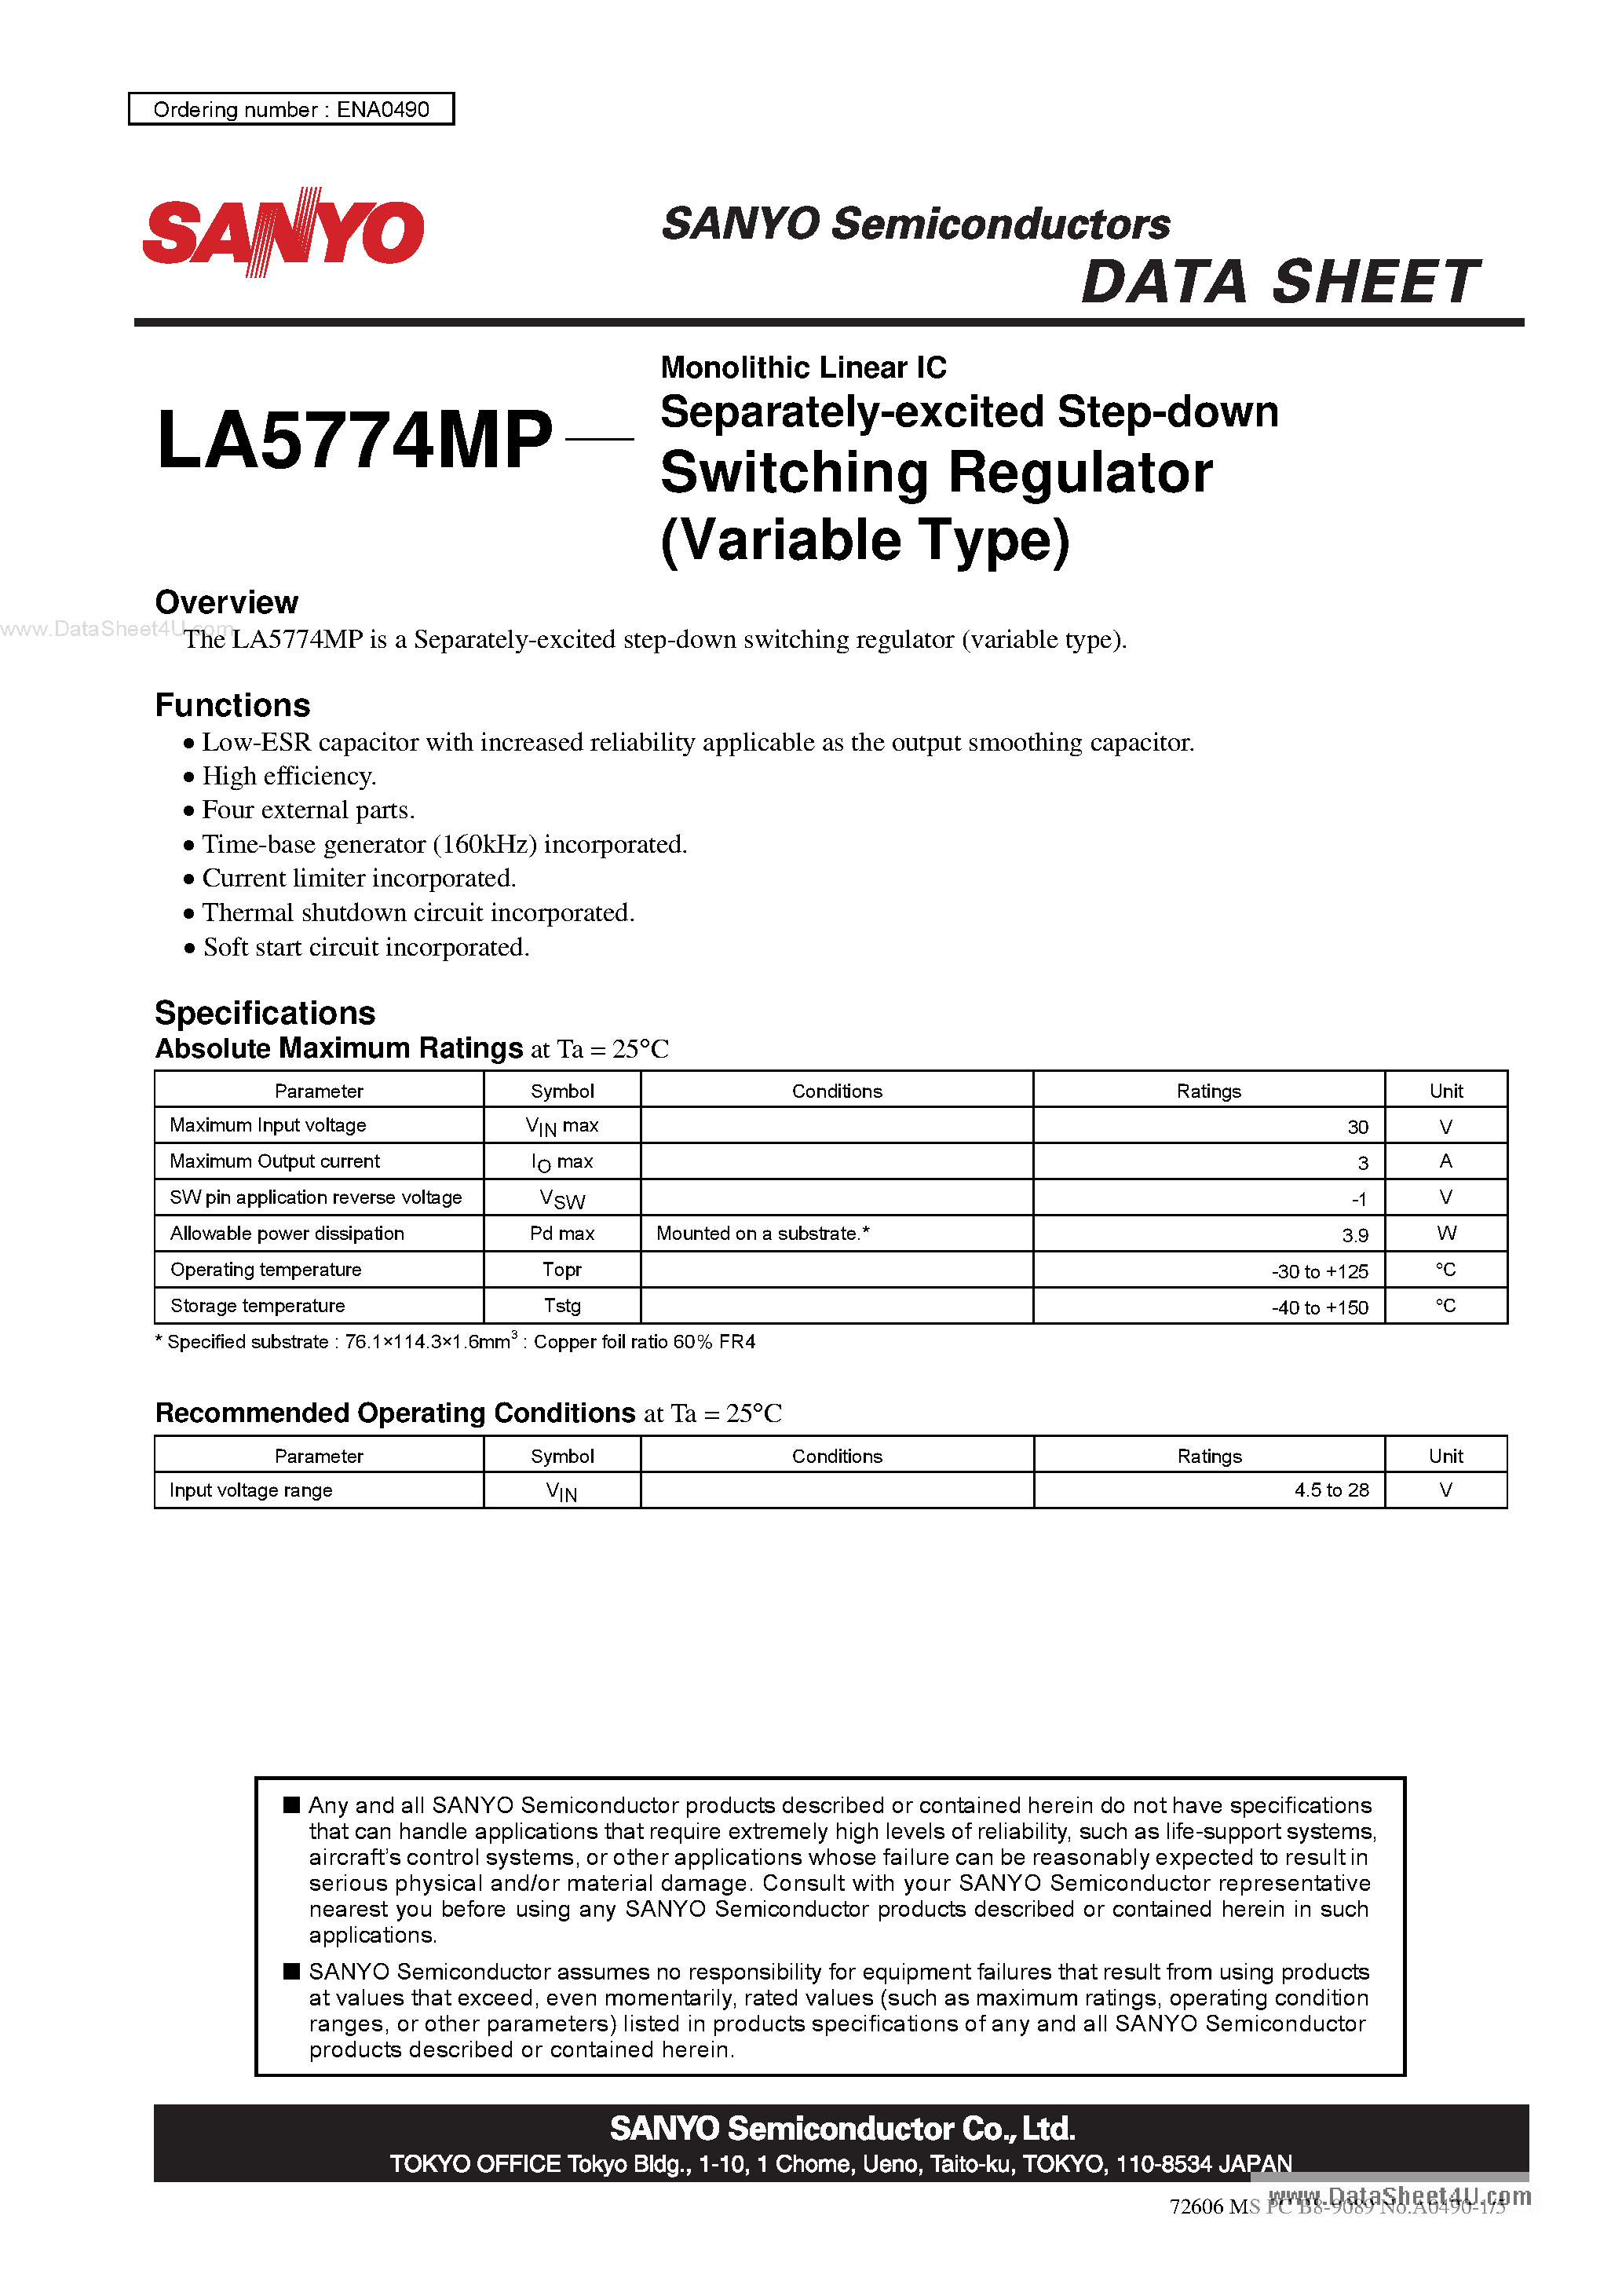 Datasheet LA5774MP - Monolithic Linear IC Separately-Excited Step-Down Switching Regulator page 1